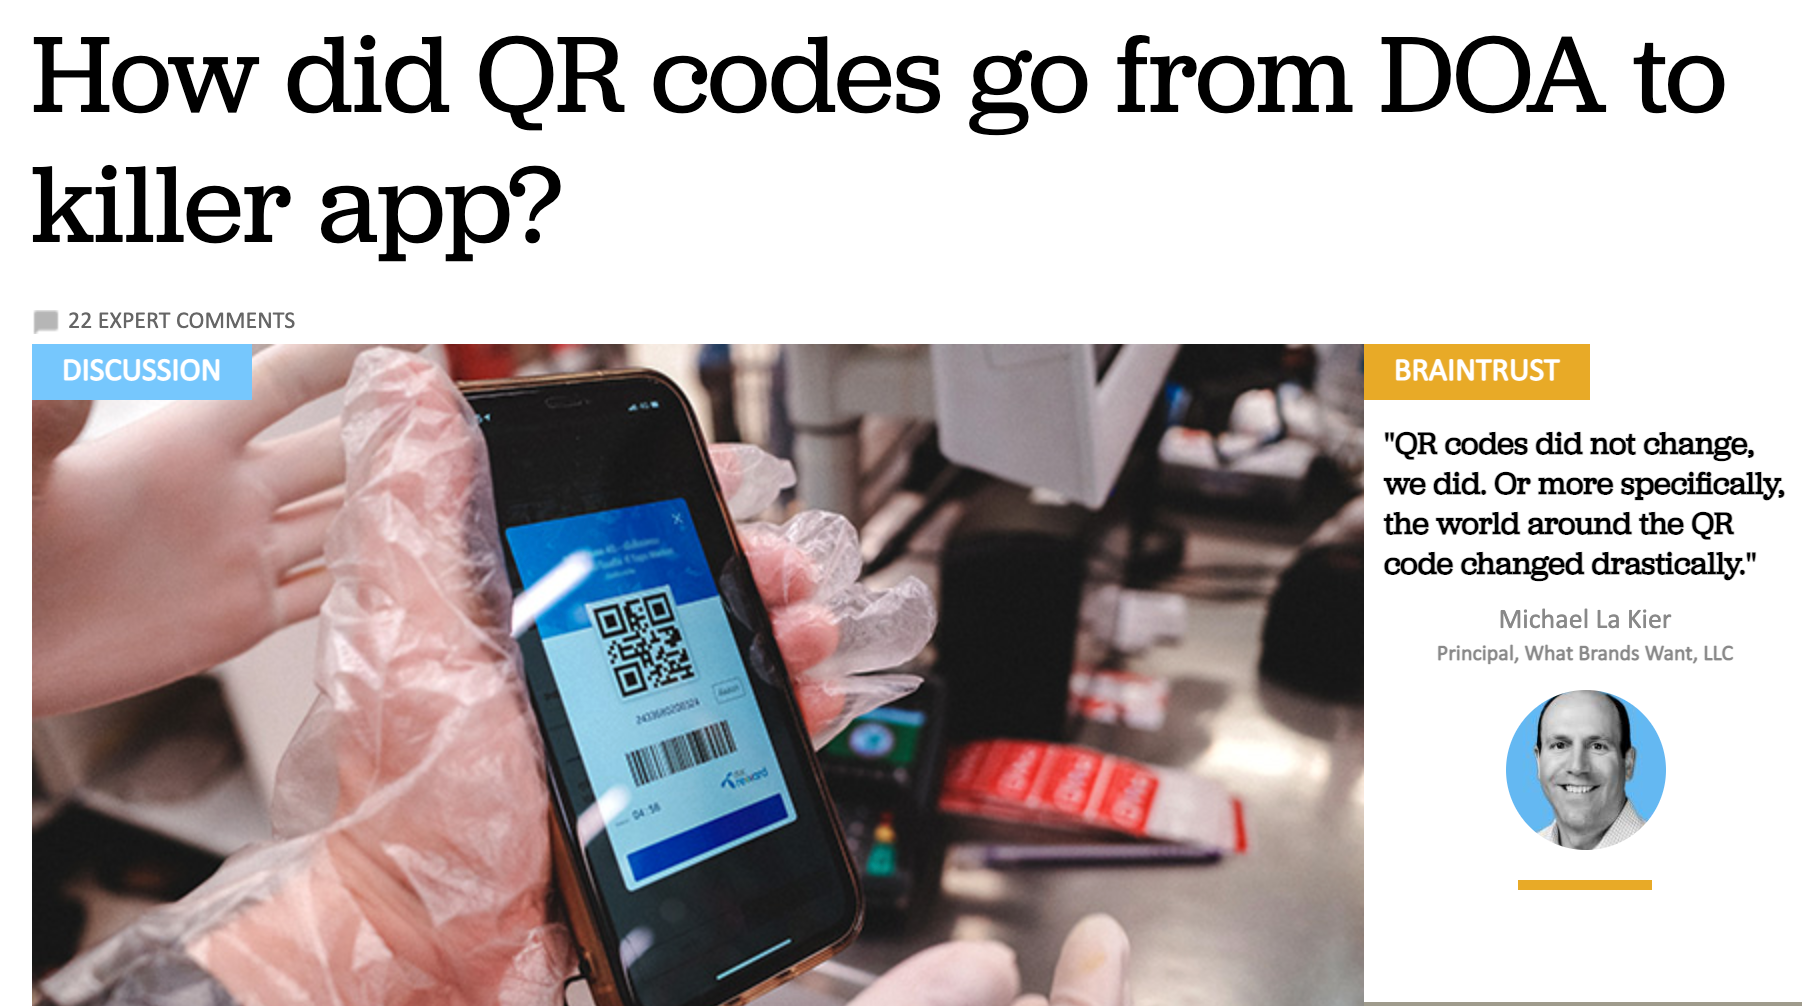 How did QR codes go from DOA to killer app?